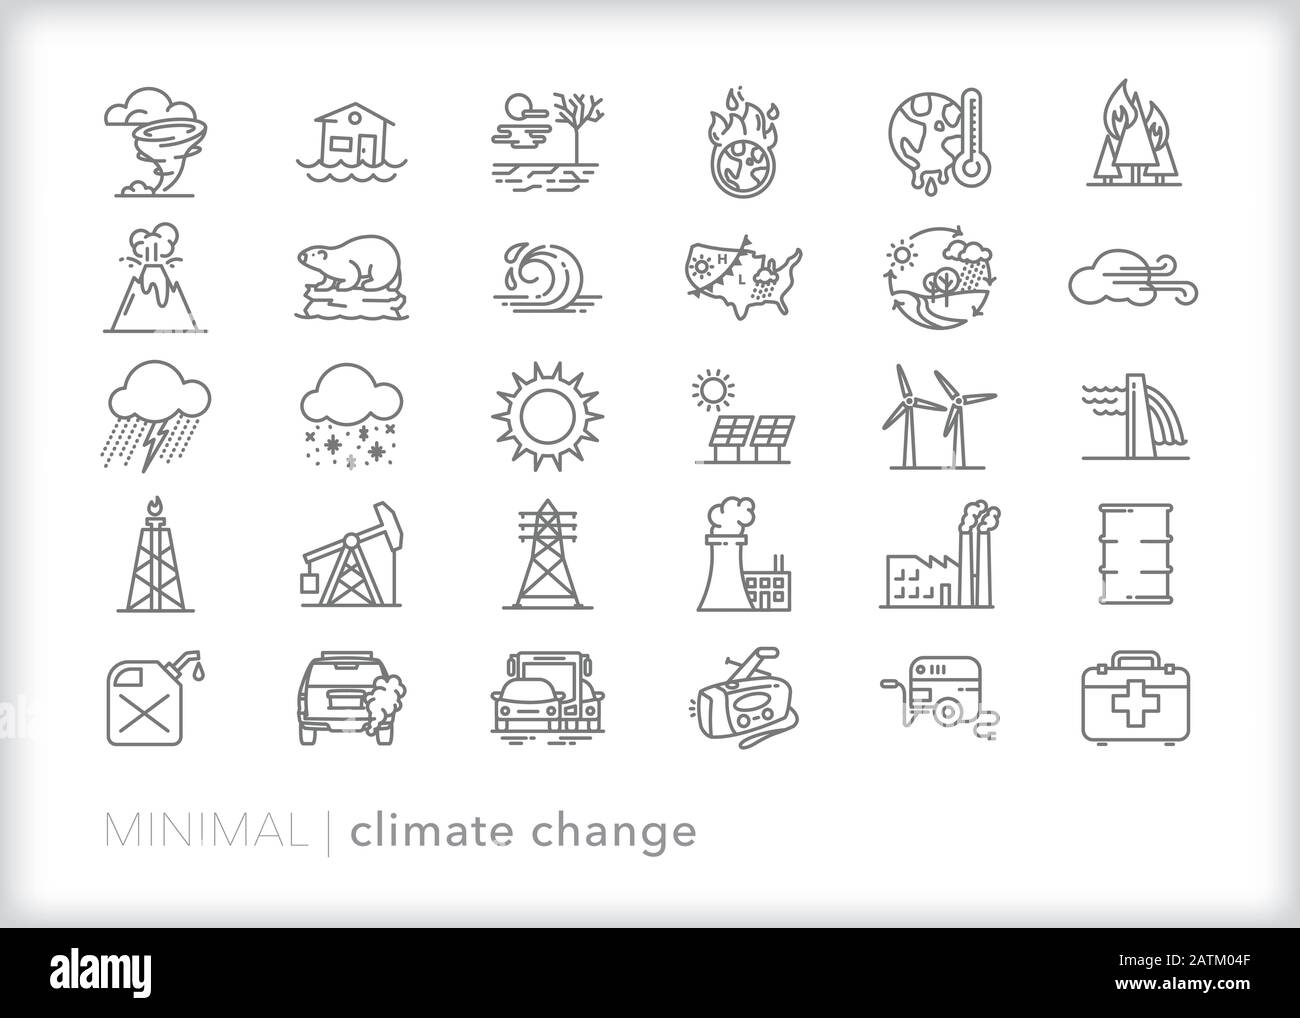 Set of 30 climate change line icons of weather, natural disasters, oil and energy industry and other elements of global warming effects Stock Vector